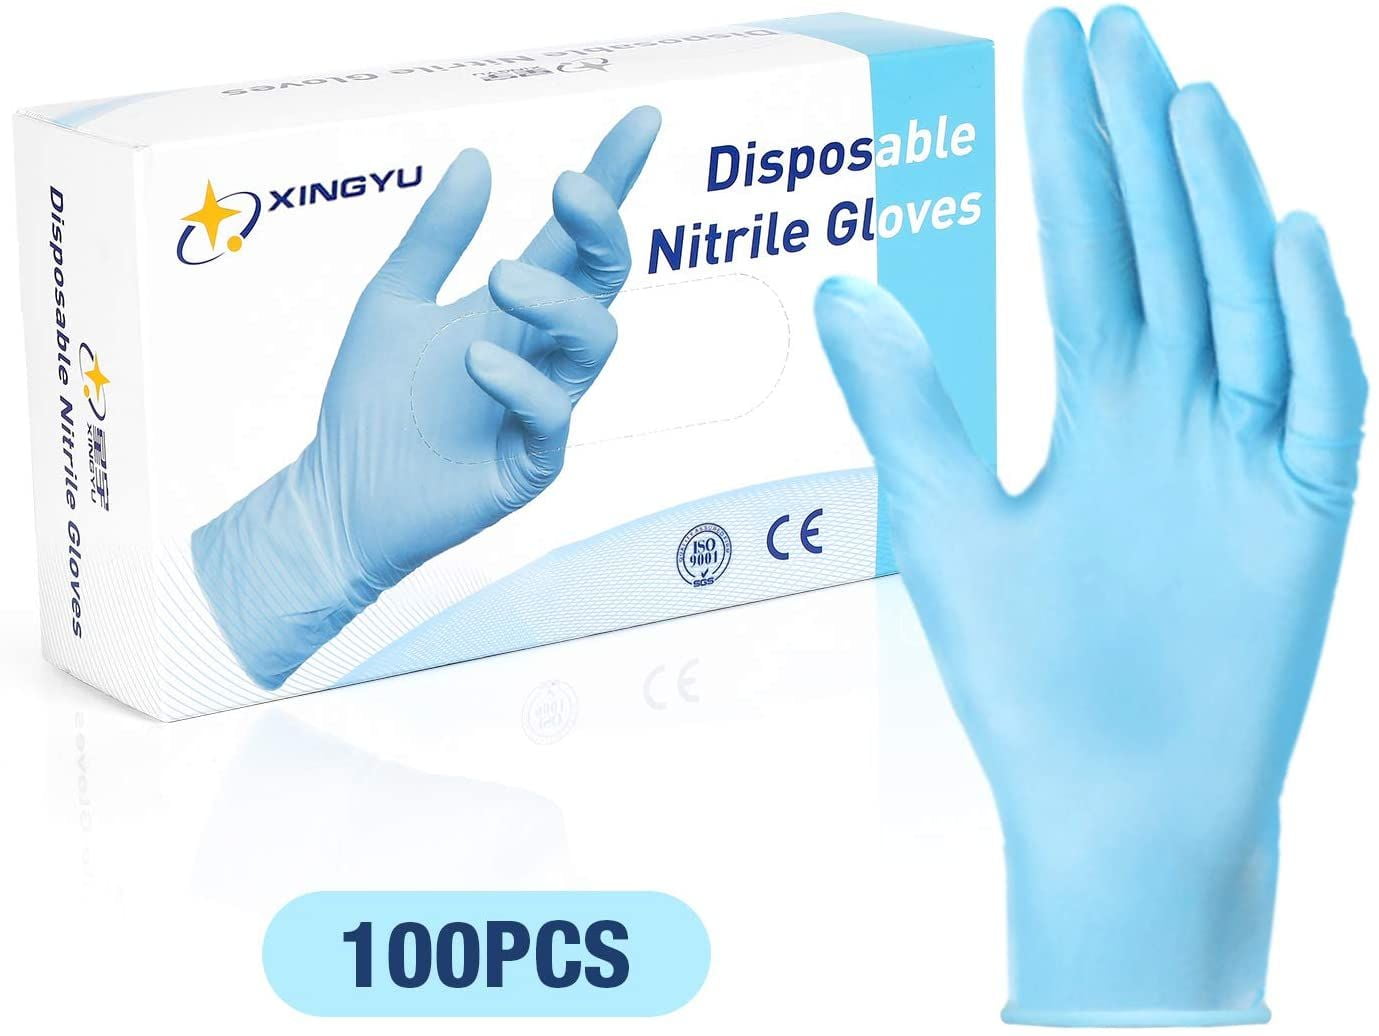 S-XL 50Pcs Powder & Latex Free with Fingerstip Textured Protective Safety Gloves INFIMOR 4mil Disposable Nitrile Gloves 